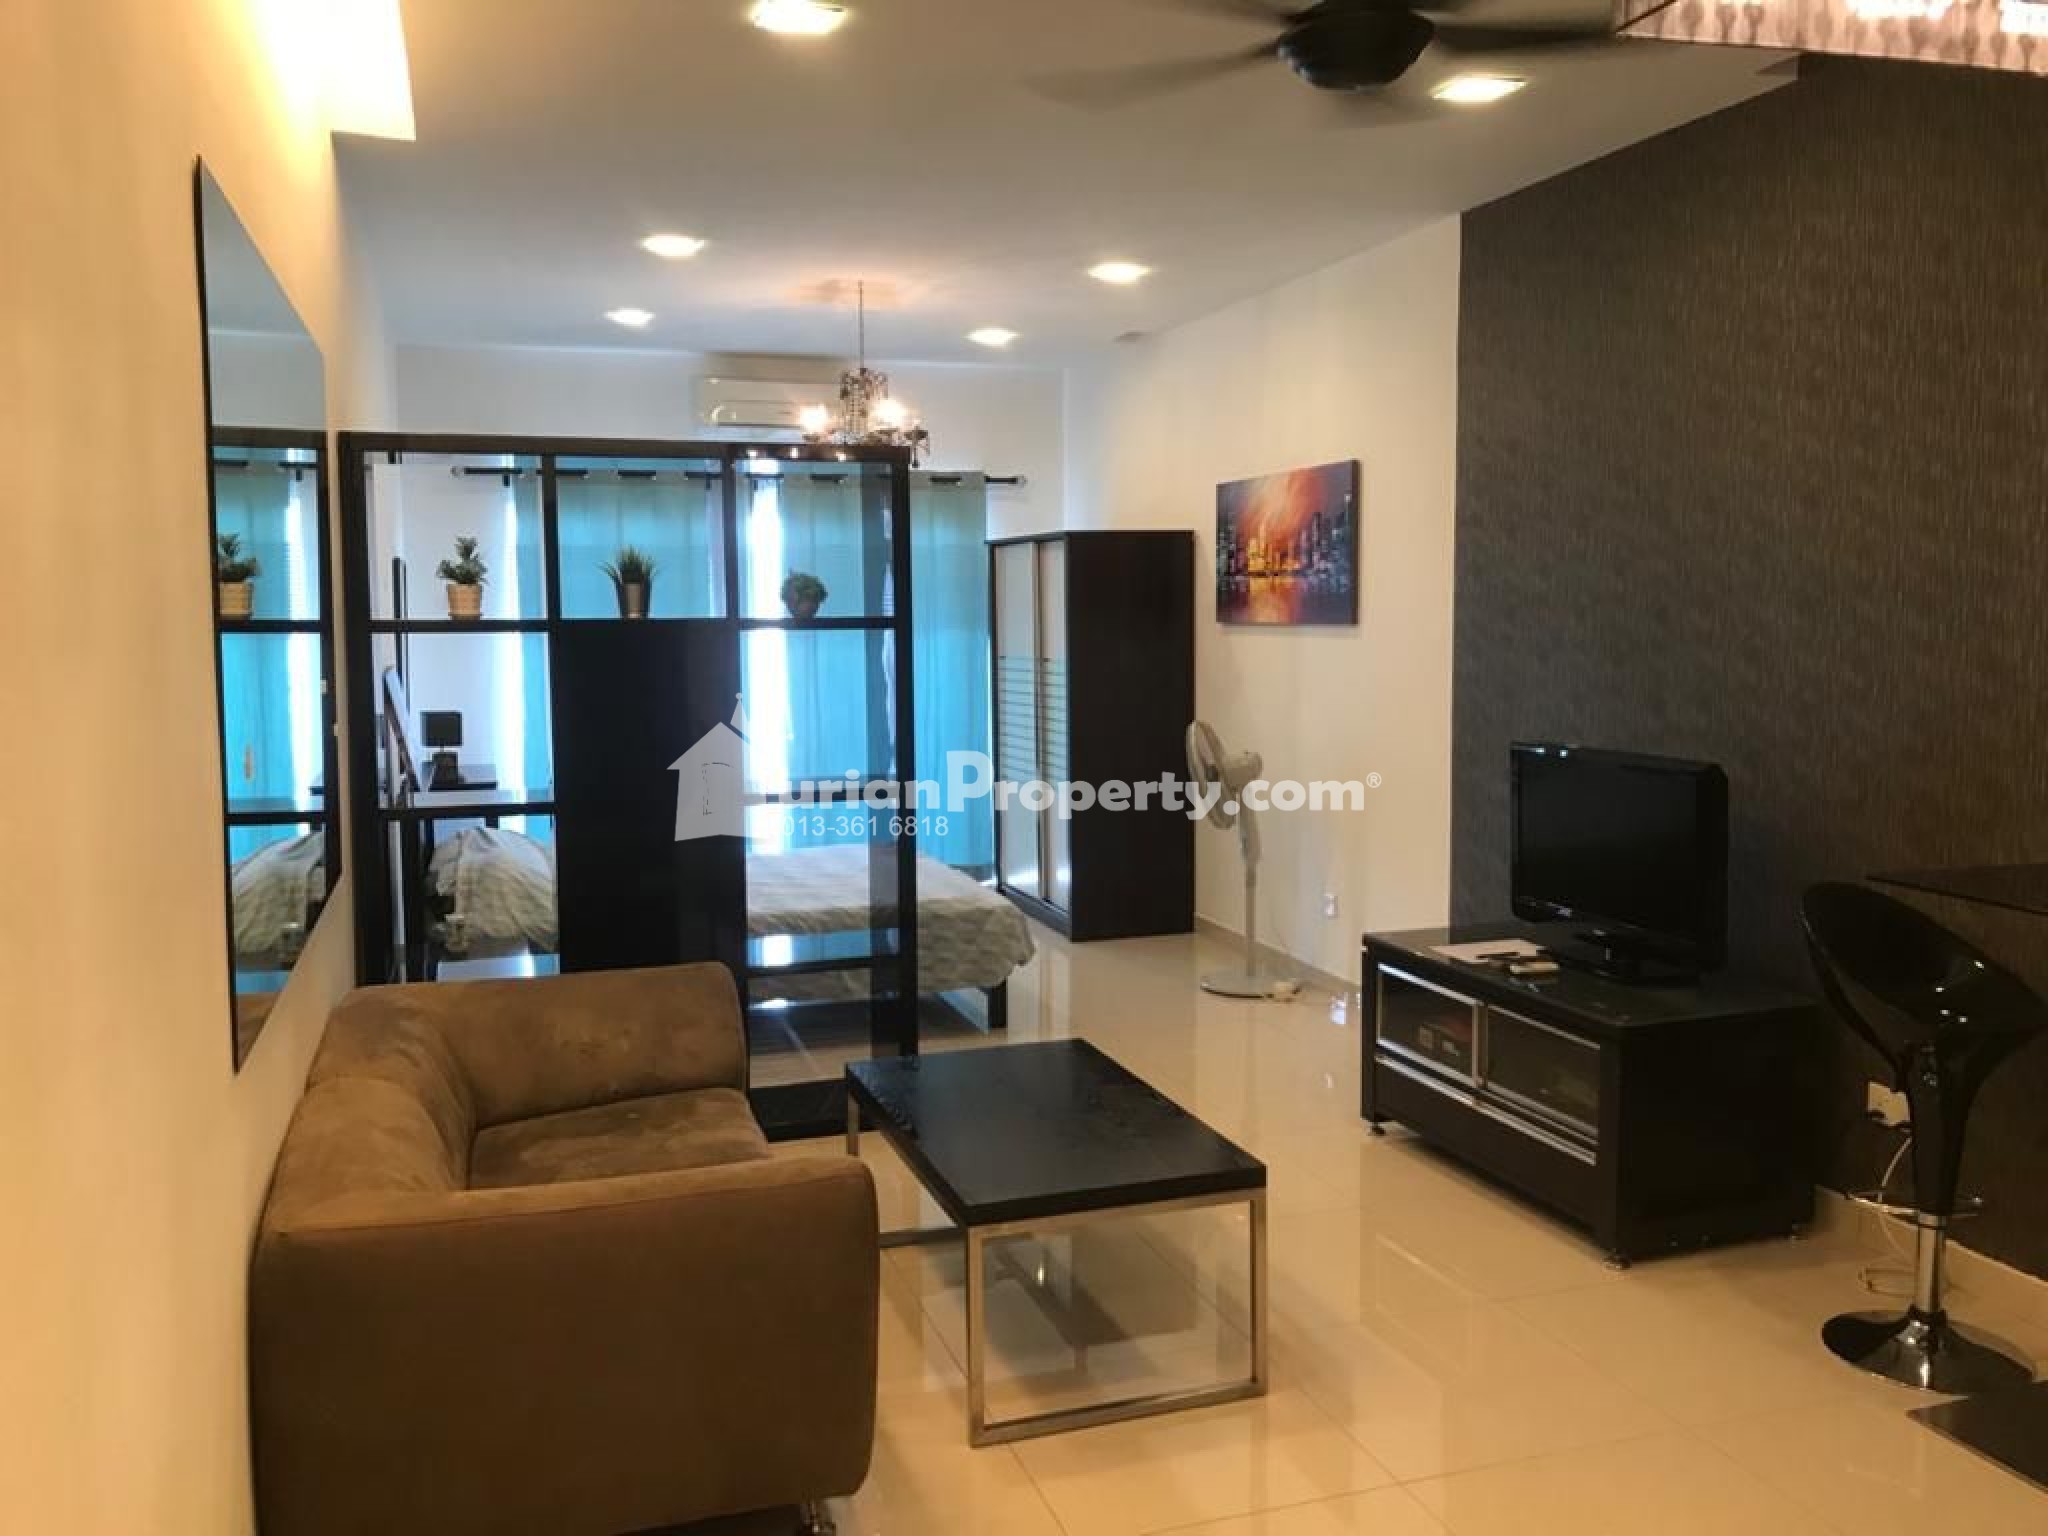 Condo For Rent at Windsor Tower